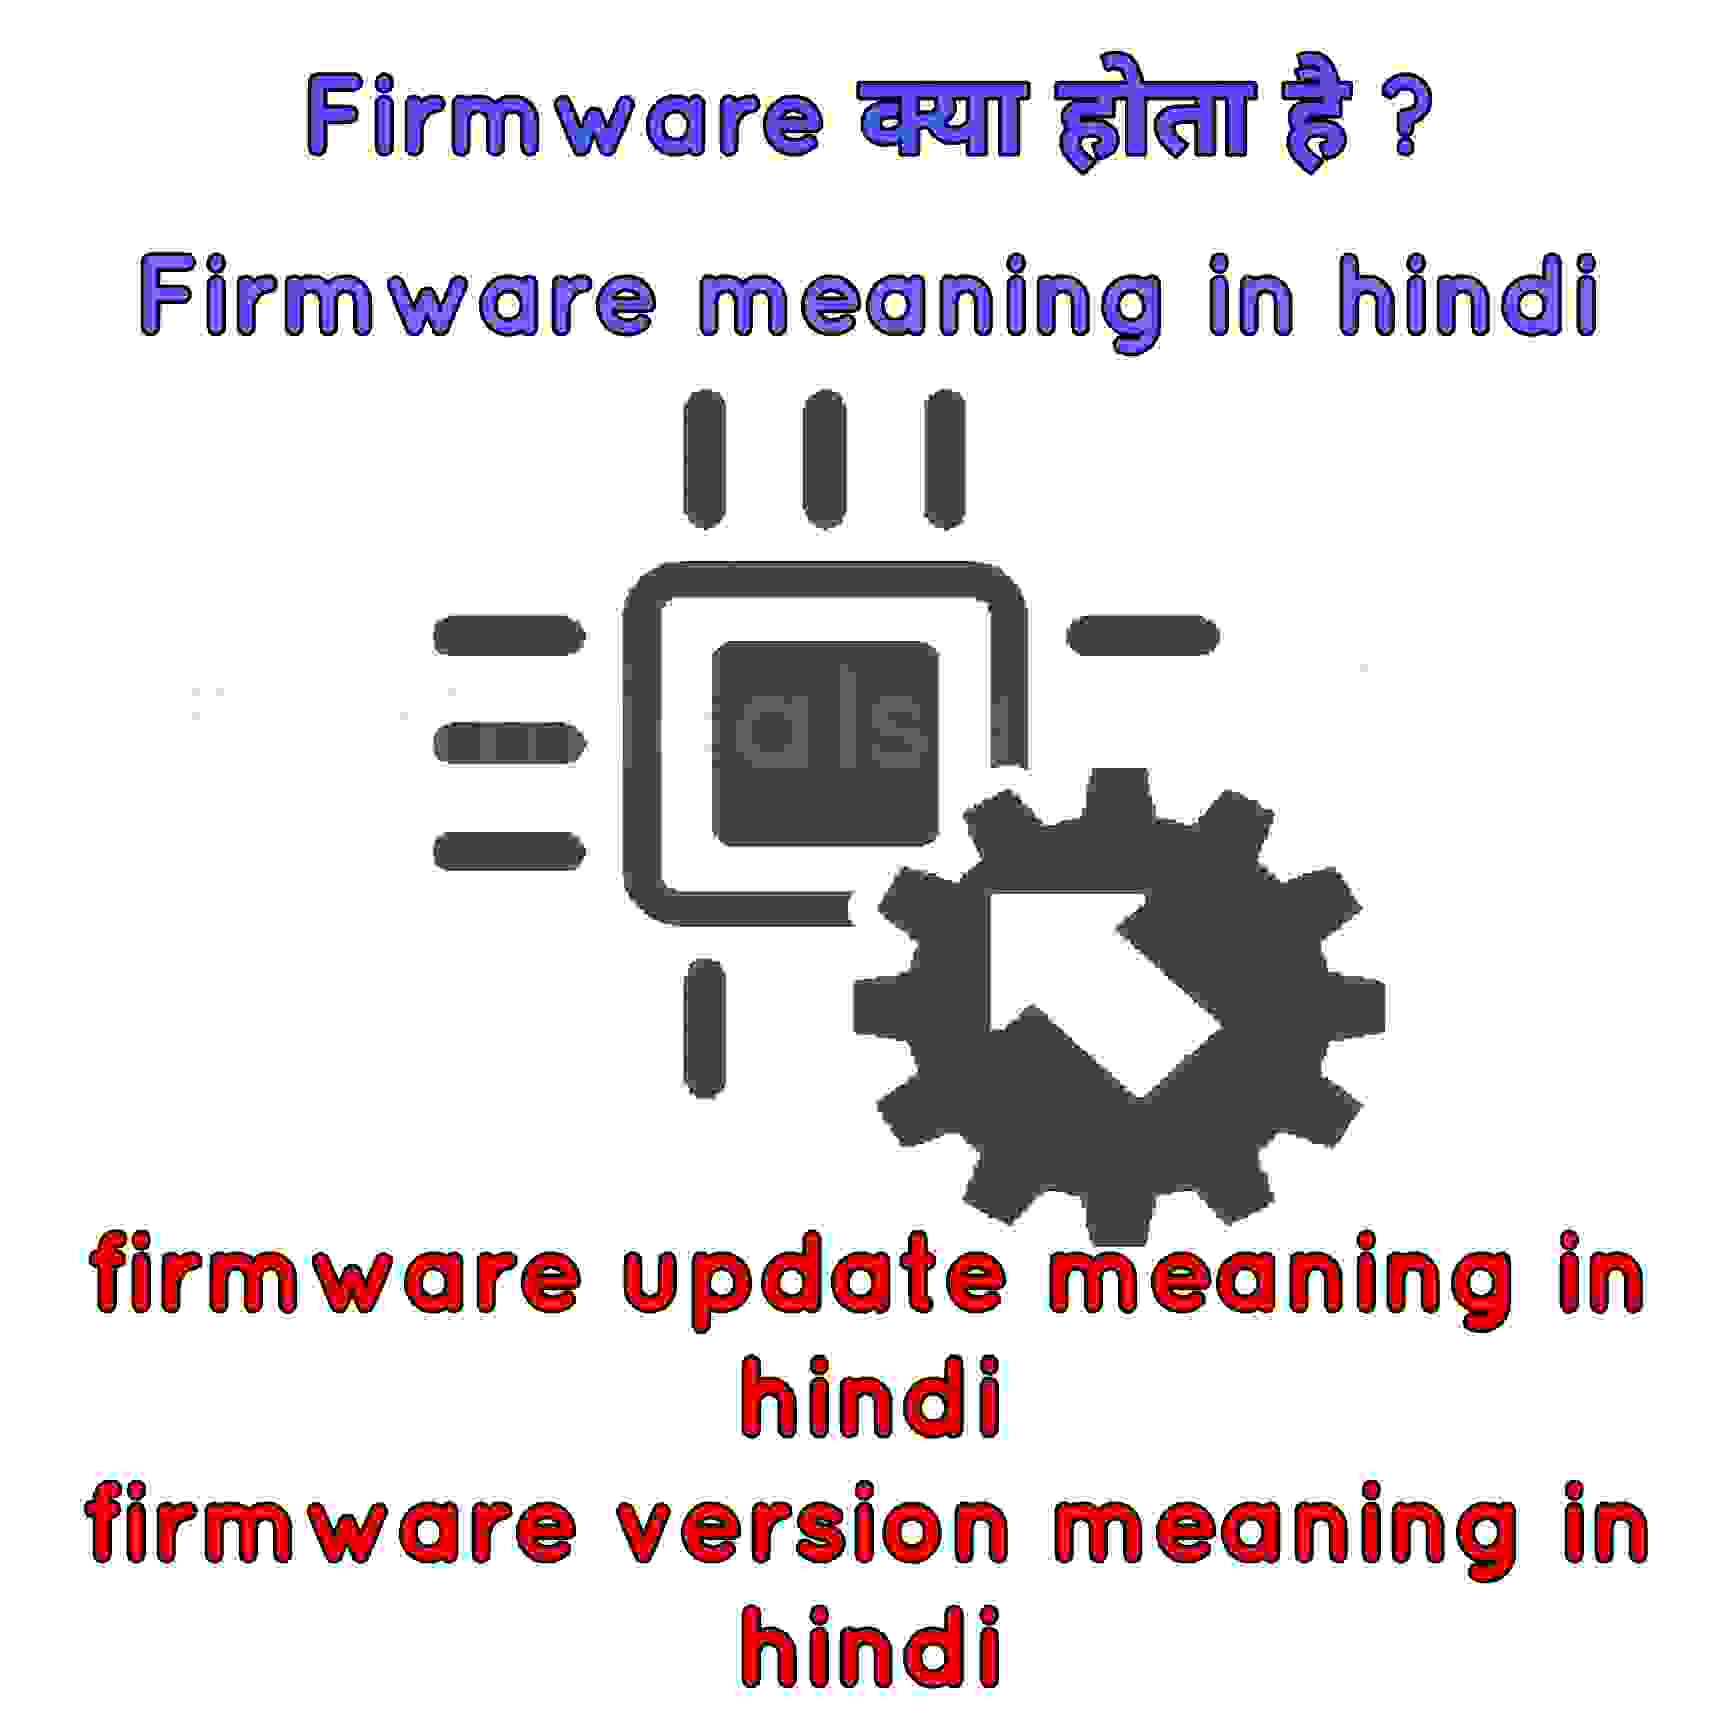 firmware meaning in hindi,Firmware की परिभाषा,Firmware kise kahate hain,firmware update meaning in hindi,firmware version meaning in hindi,firmware